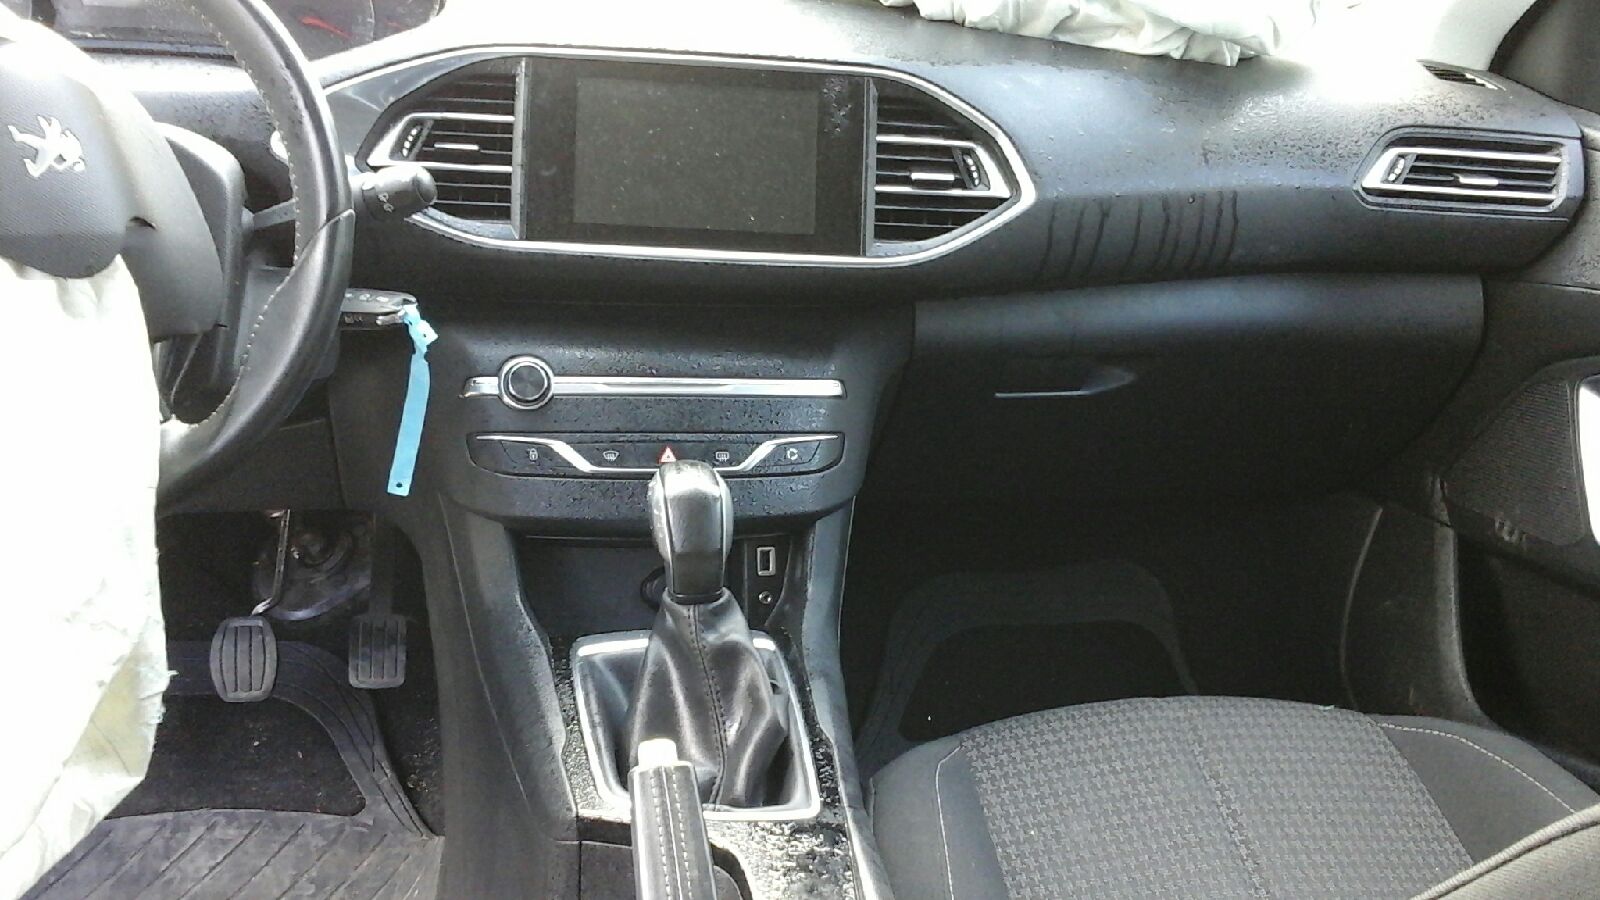 PEUGEOT 308 T9 (2013-2021) Switches 96777660ZD, 10093069, LKPATASROTAS 18700174